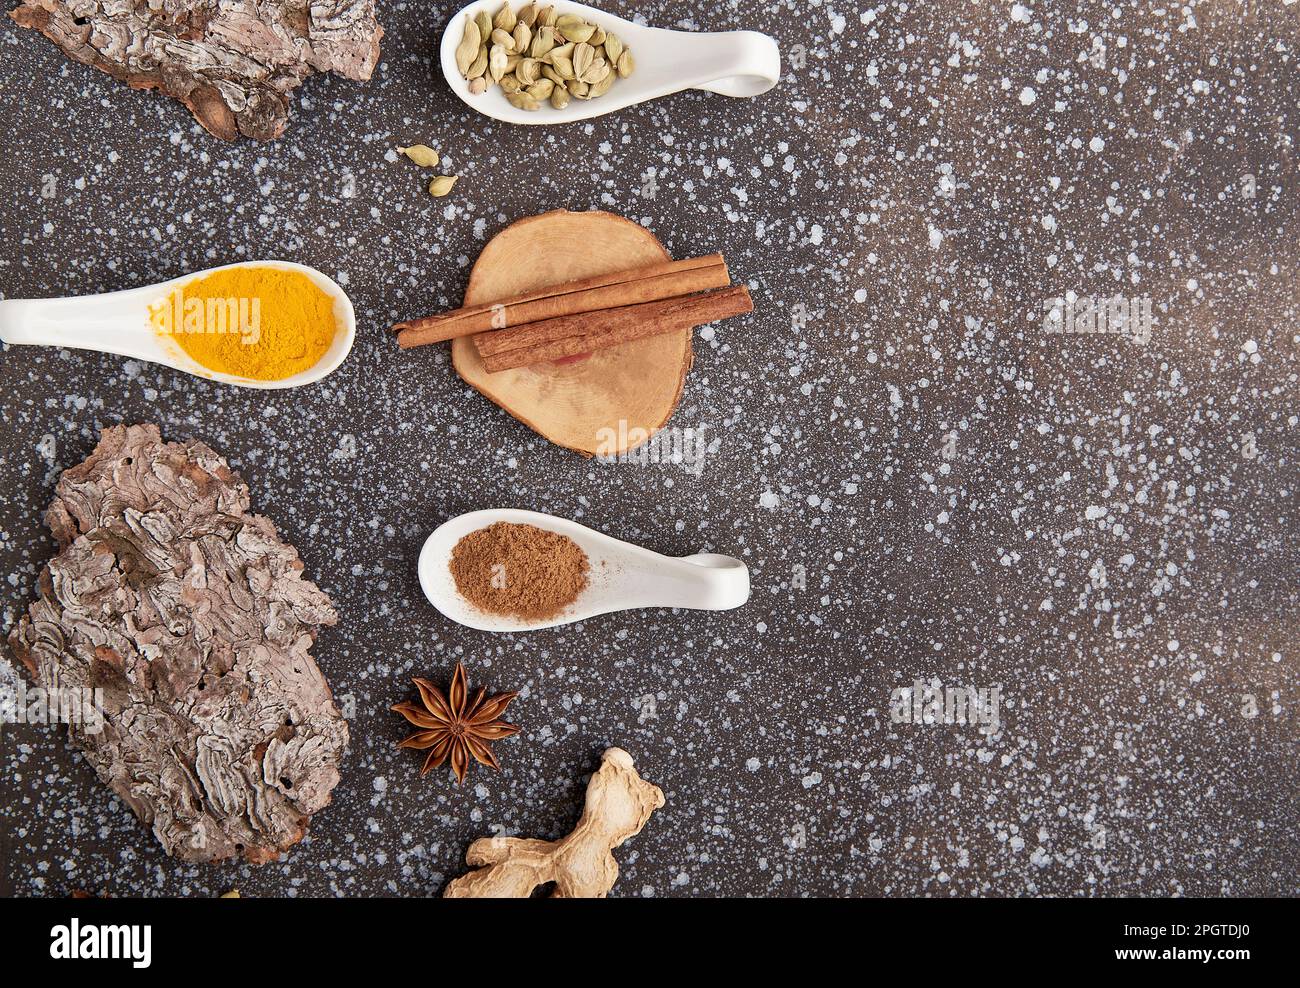 Natural spices of turmeric, cardamom, cinnamon, dried ginger, star anise with copy space. Condiments on black background. Stock Photo